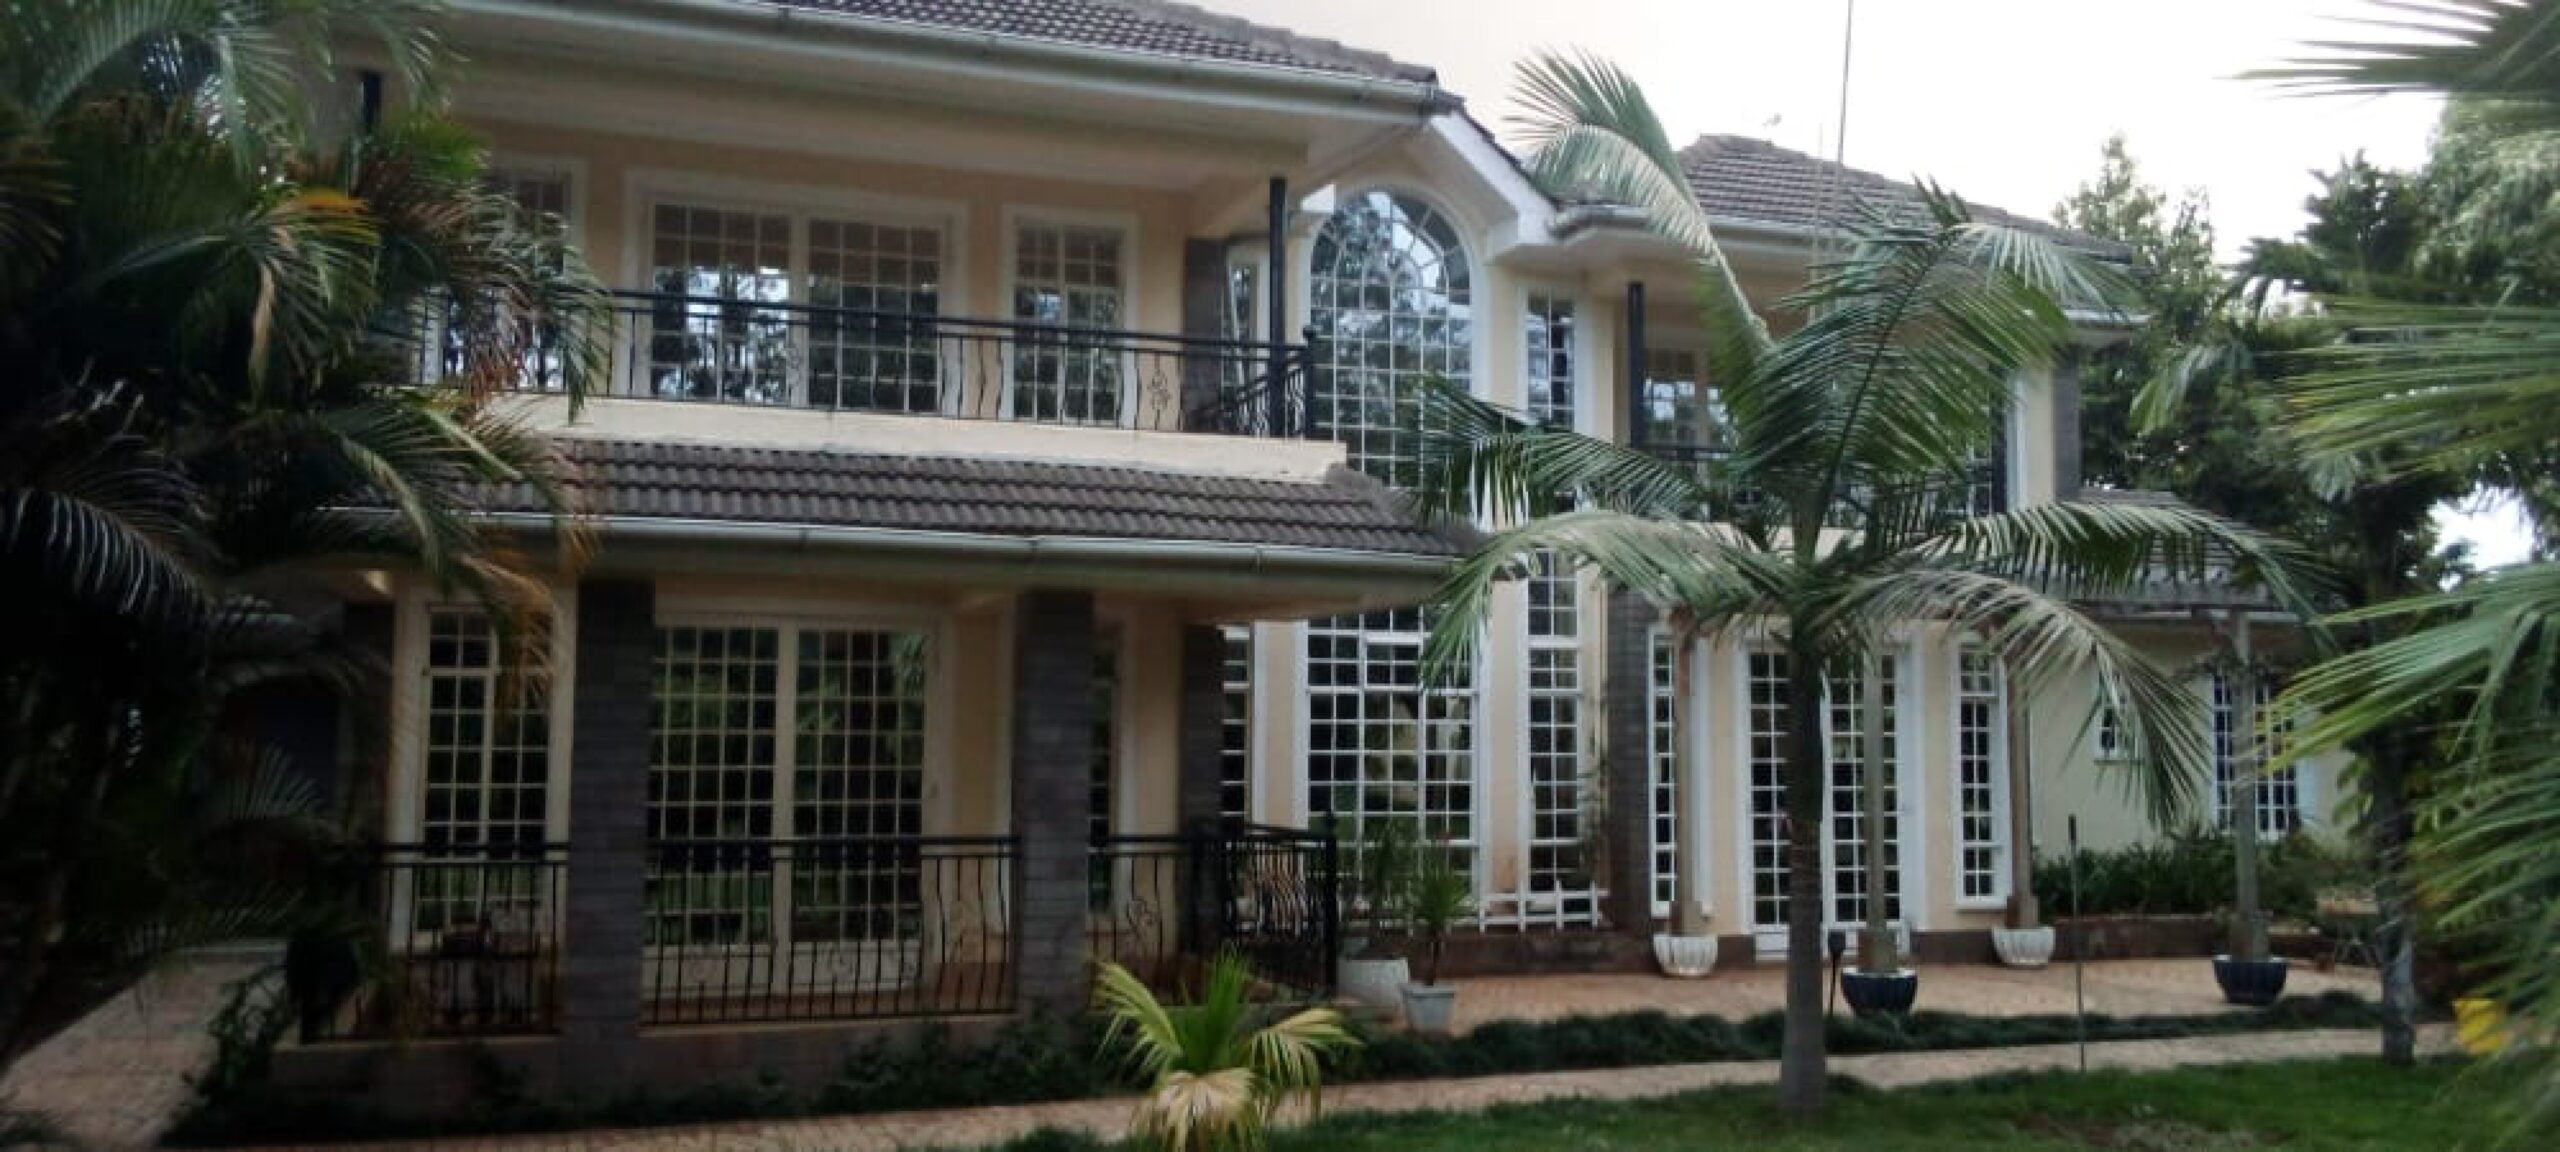 House/Apartment For Sale Real Estate-4 bedroom MASSIONETE for sale in karen marist on 1/2 acre EXCLUSIVE 1